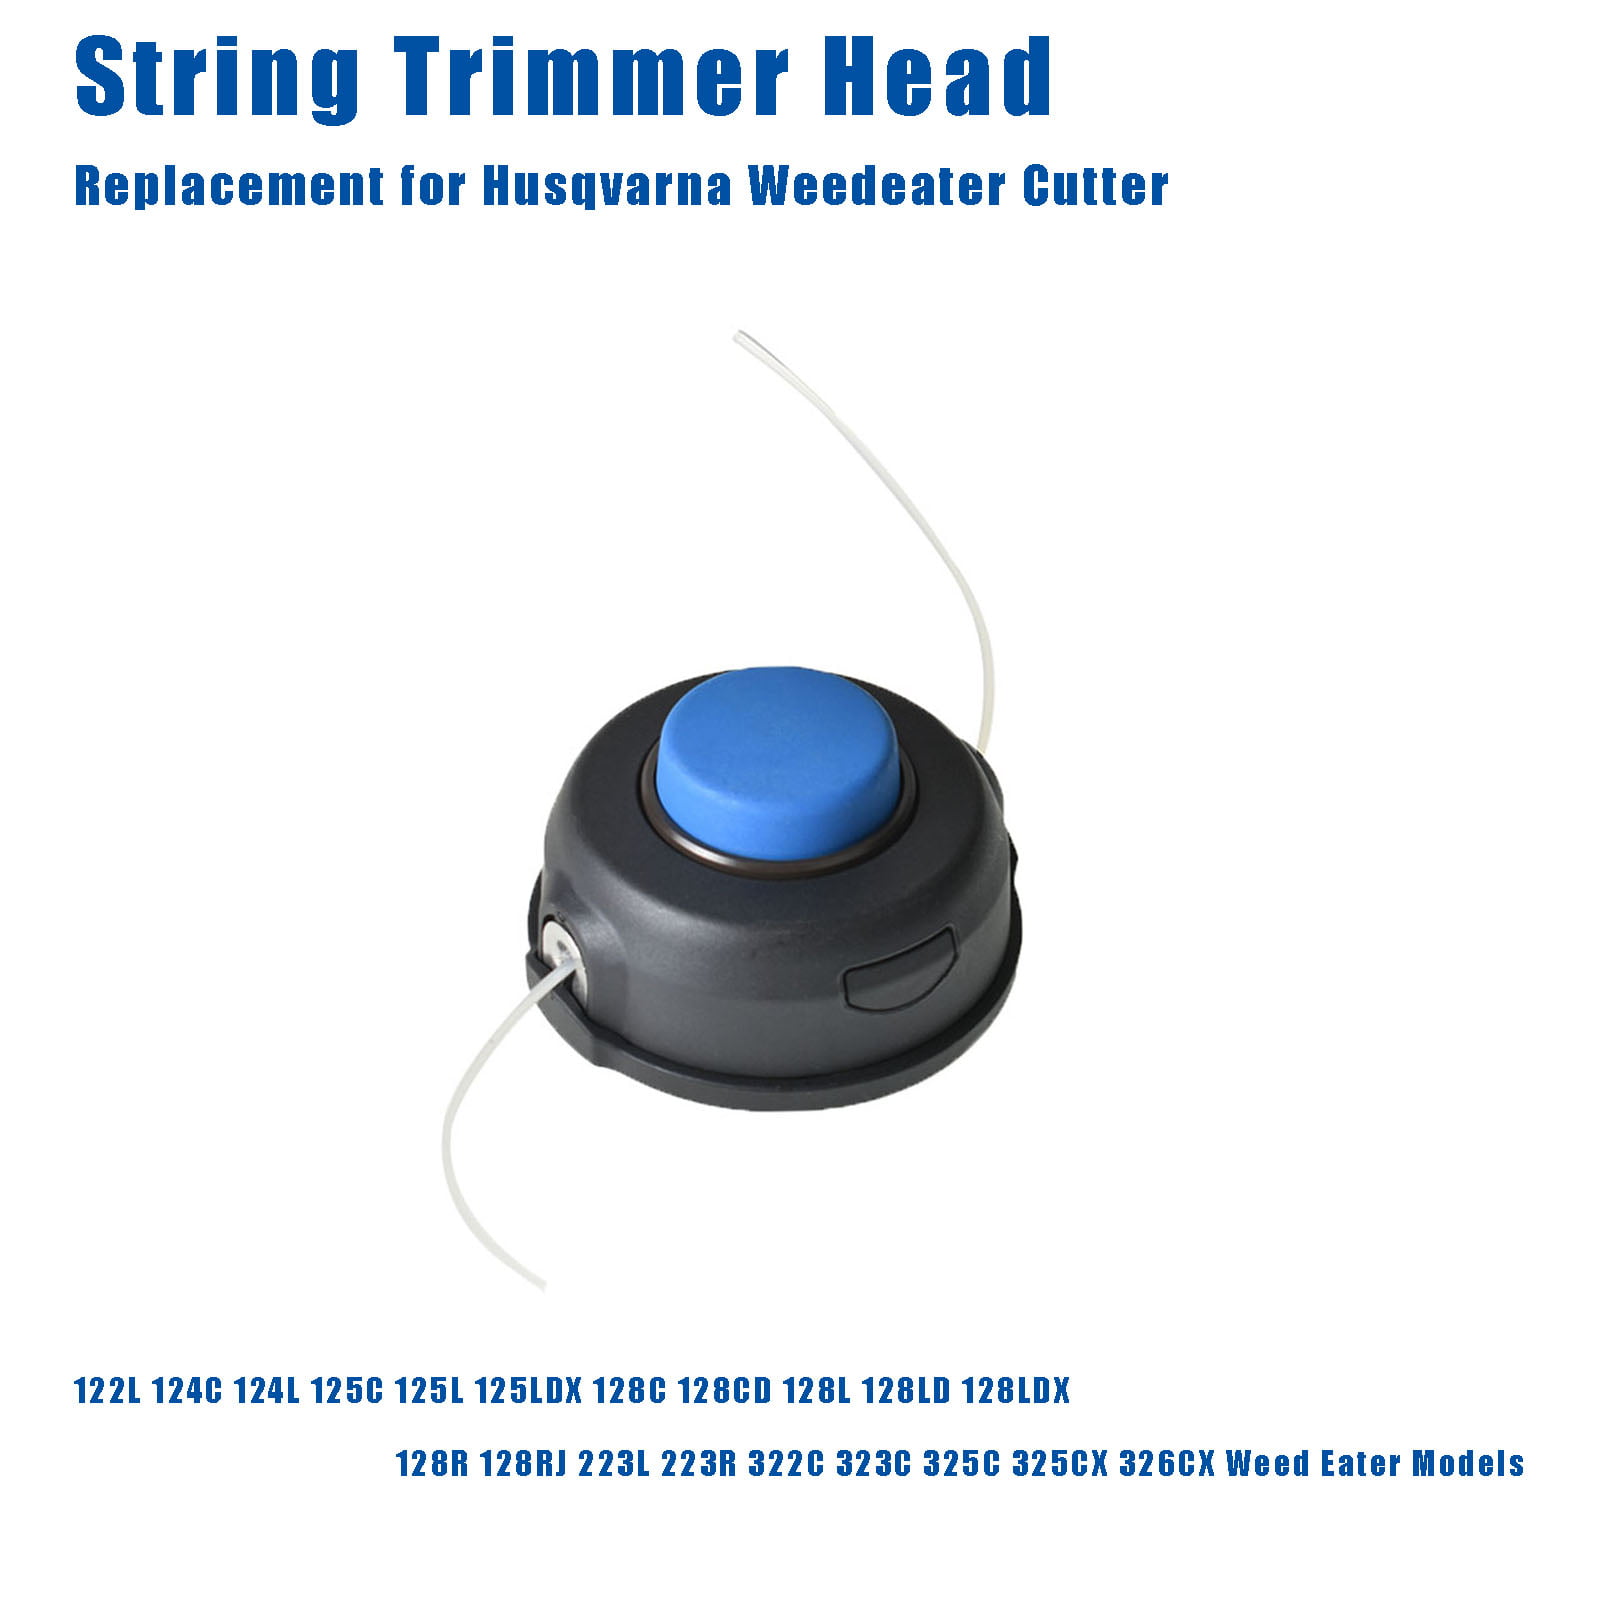 T25 Trimmer Head for Husqvarna 122L 124C 124L 125L 128C 128L Weed Eater Trimmers